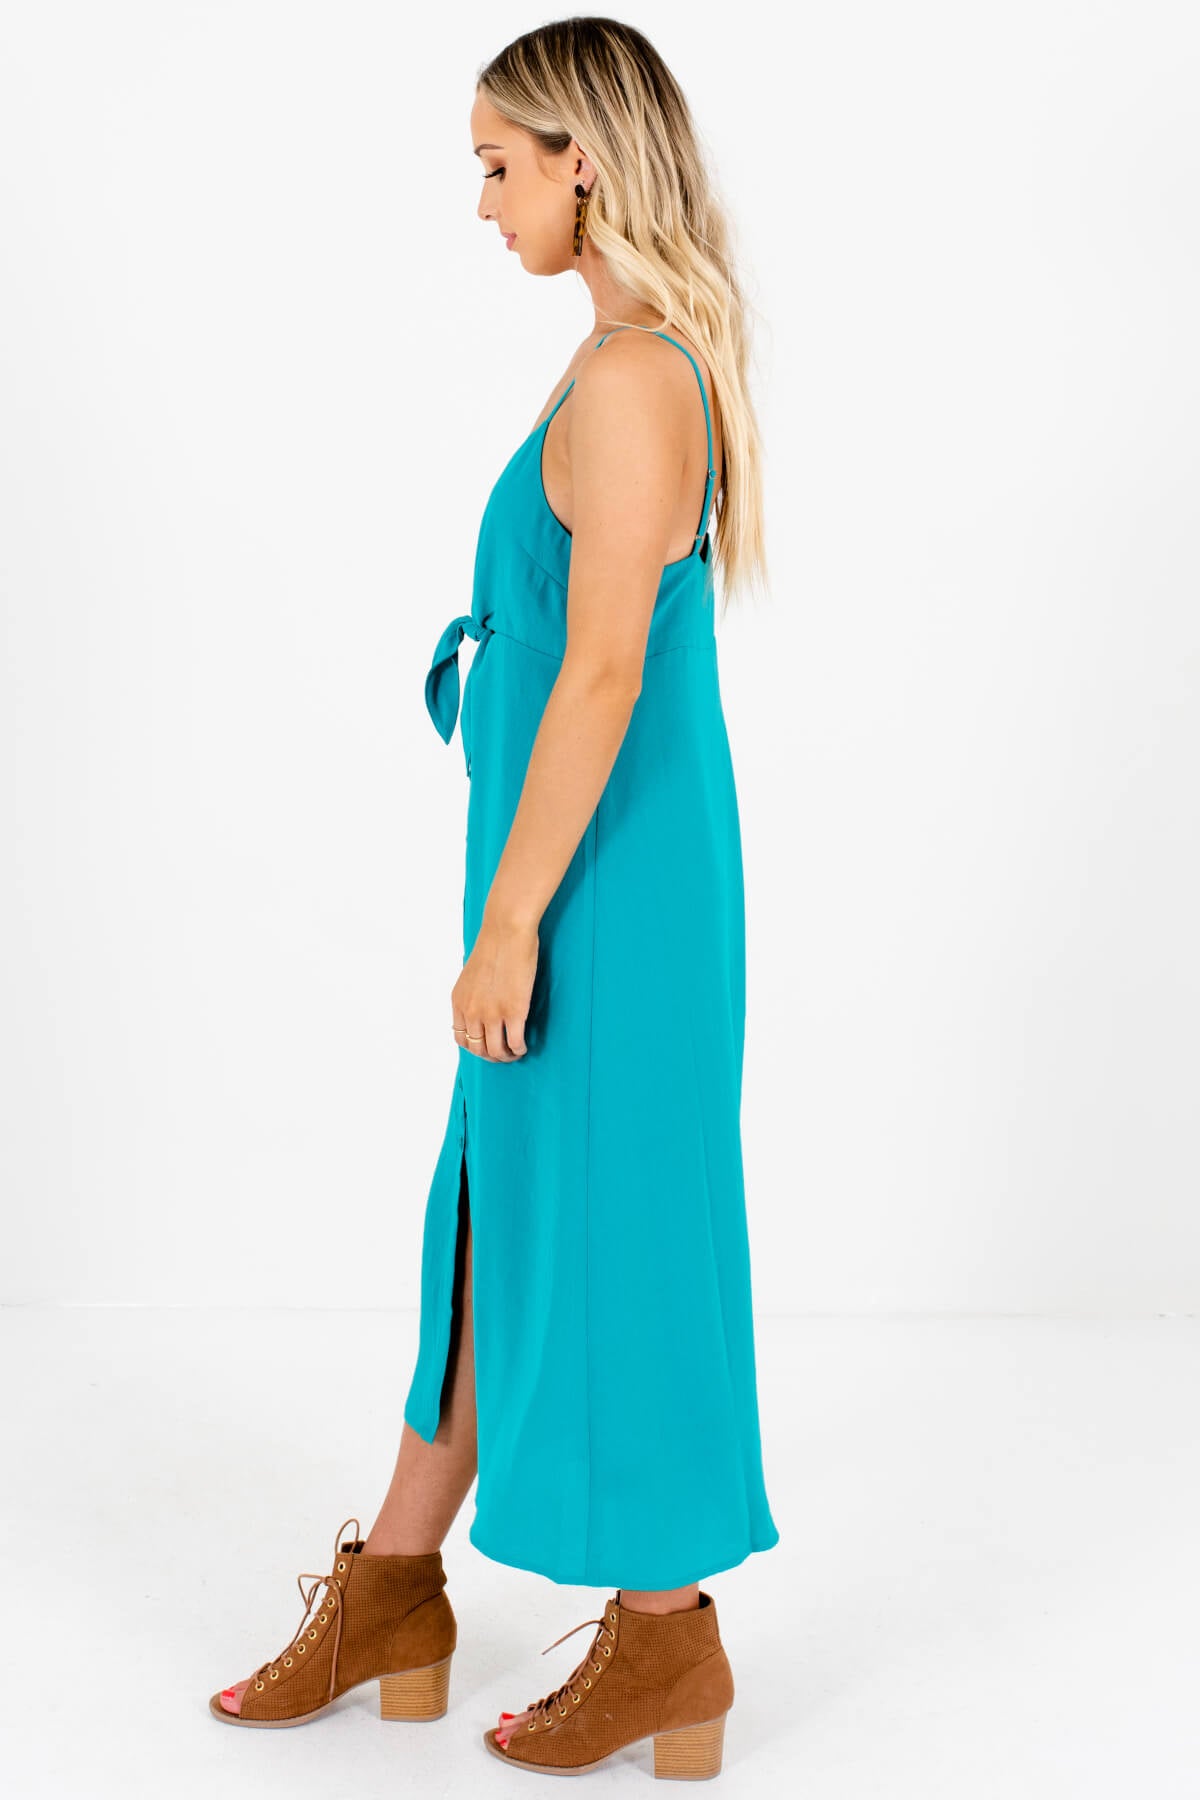 Turquoise Teal Tie-Front Button-Up Midi Dresses for Women